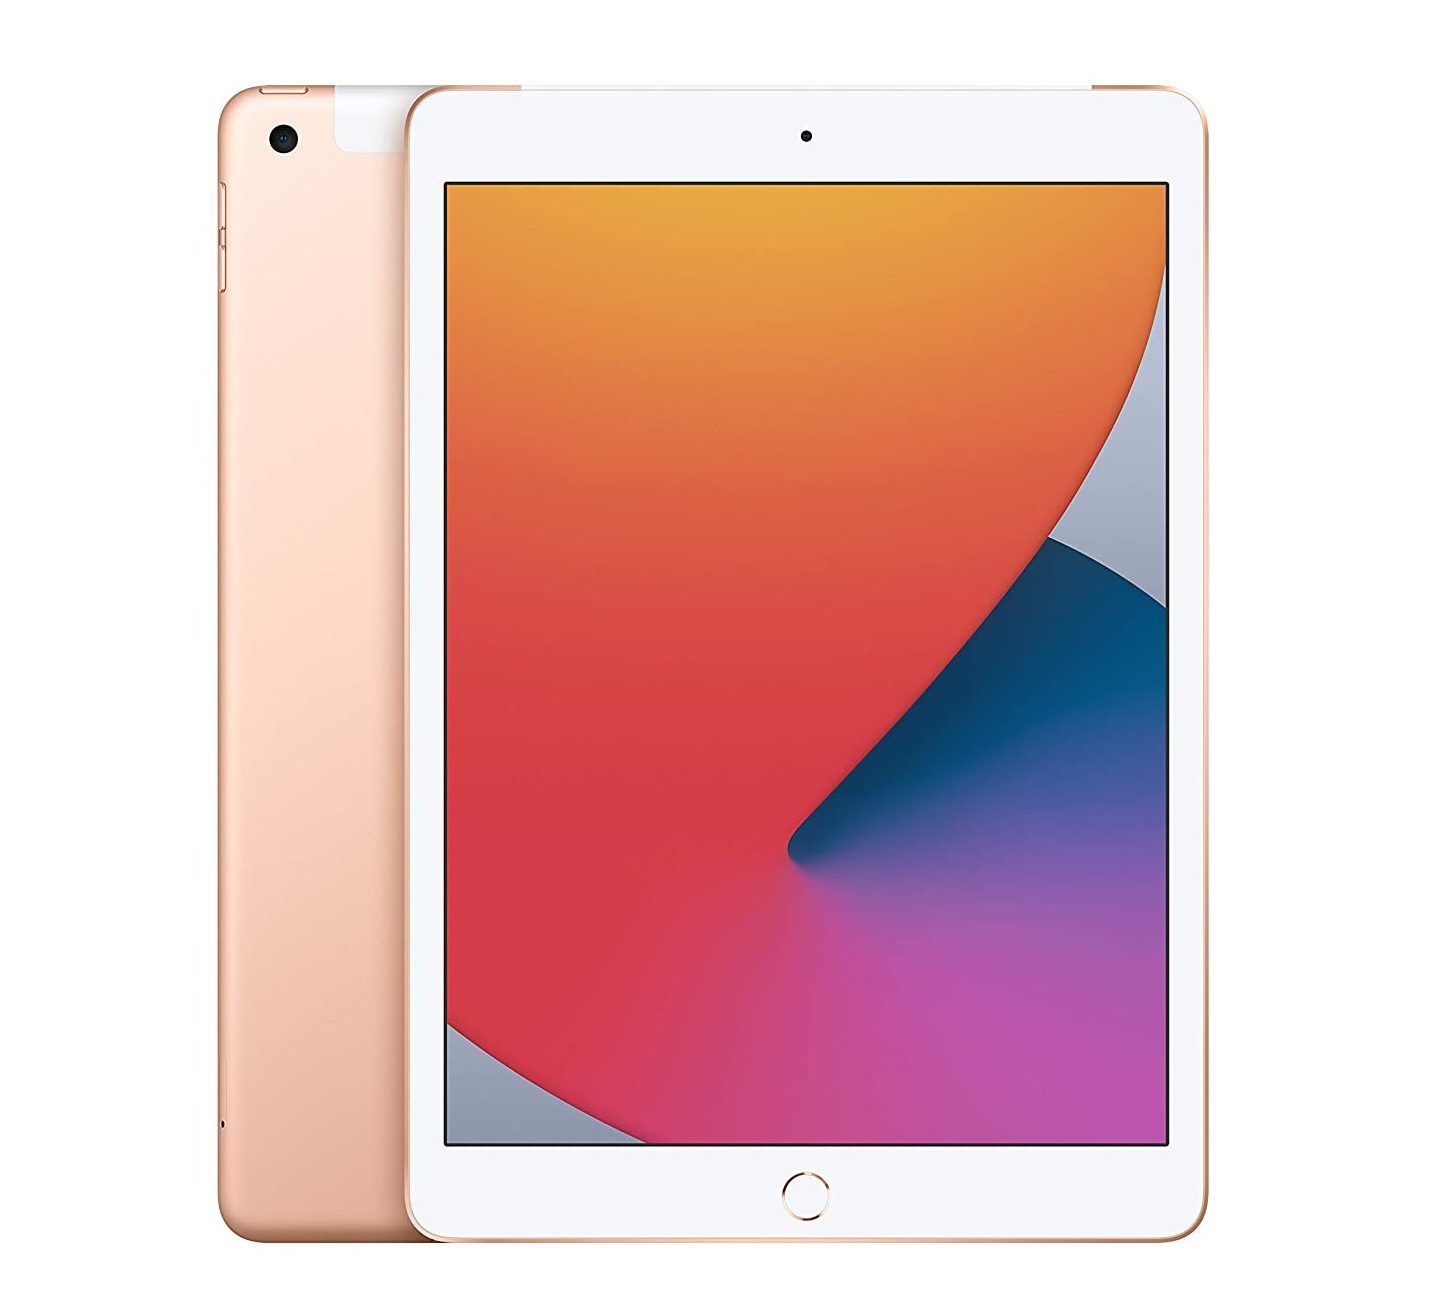 9th generation iPad to come with a faster processor and thinner design